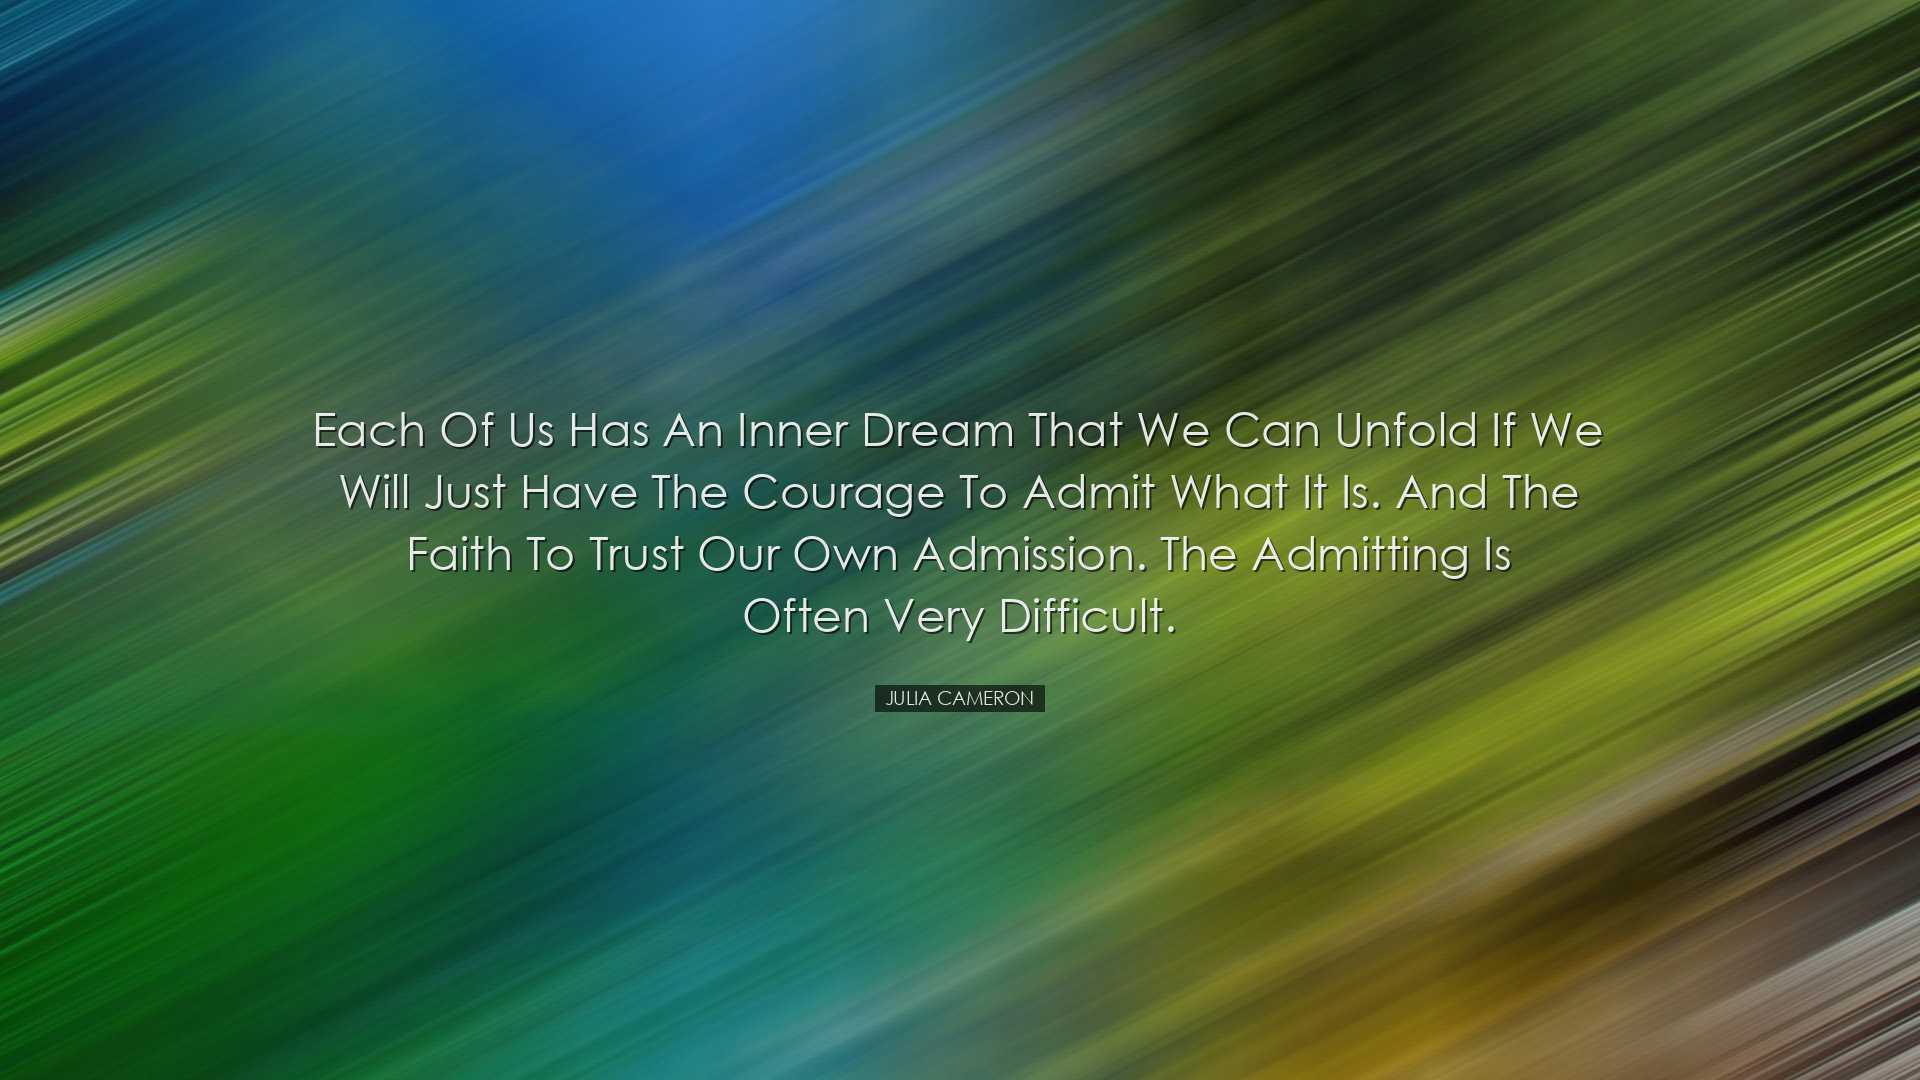 Each of us has an inner dream that we can unfold if we will just h